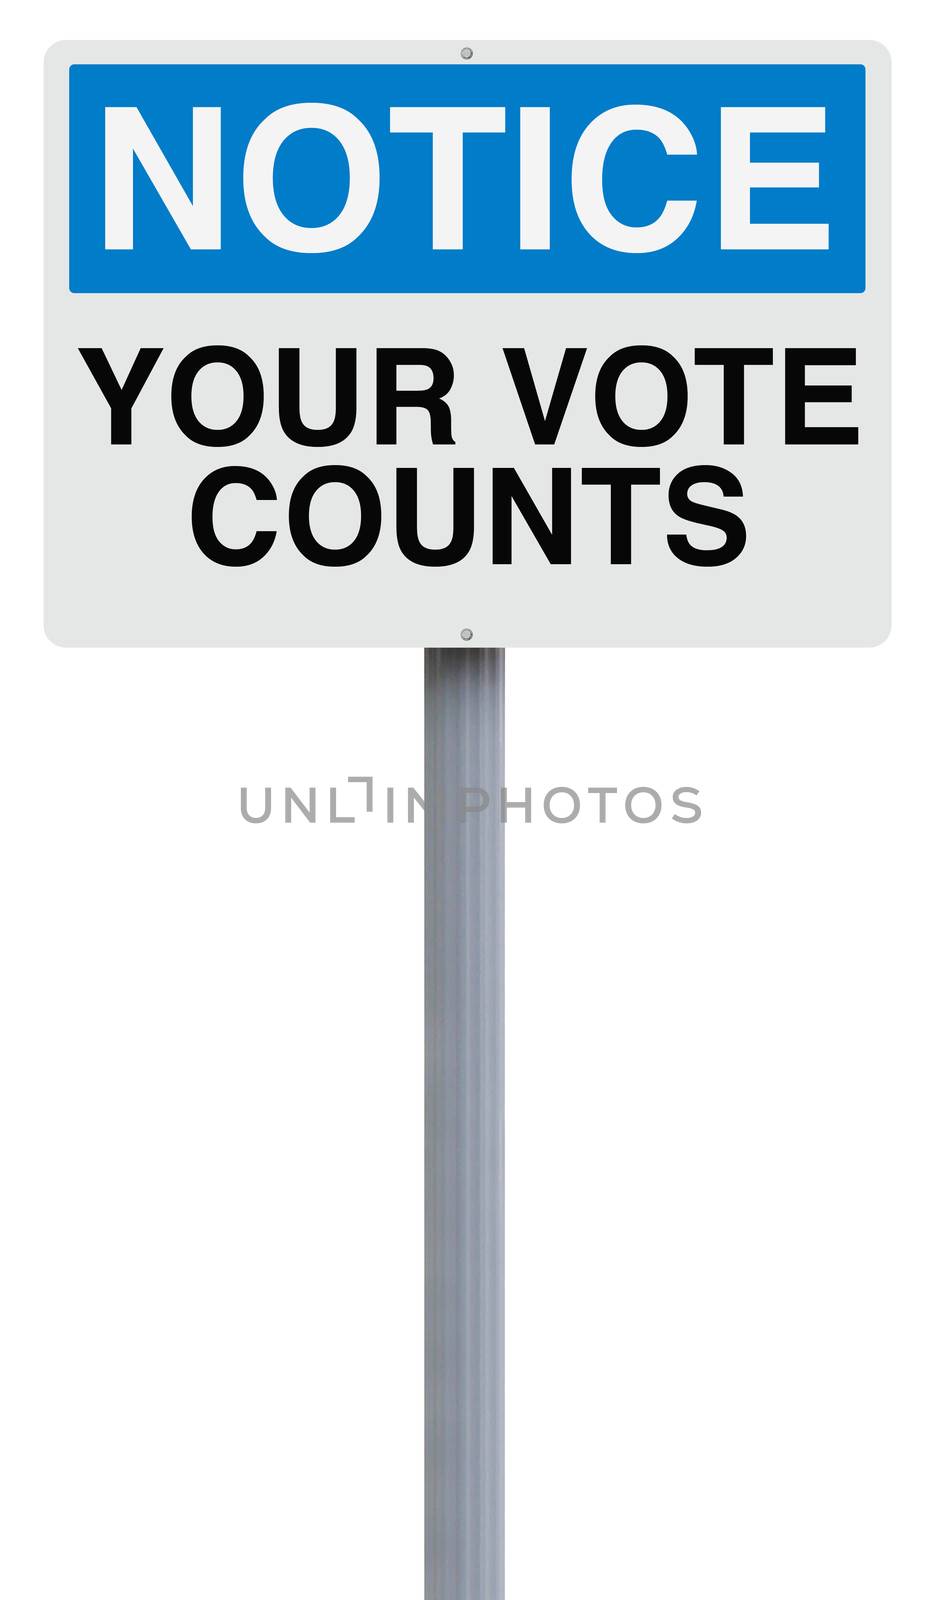 A notice sign on elections or voting